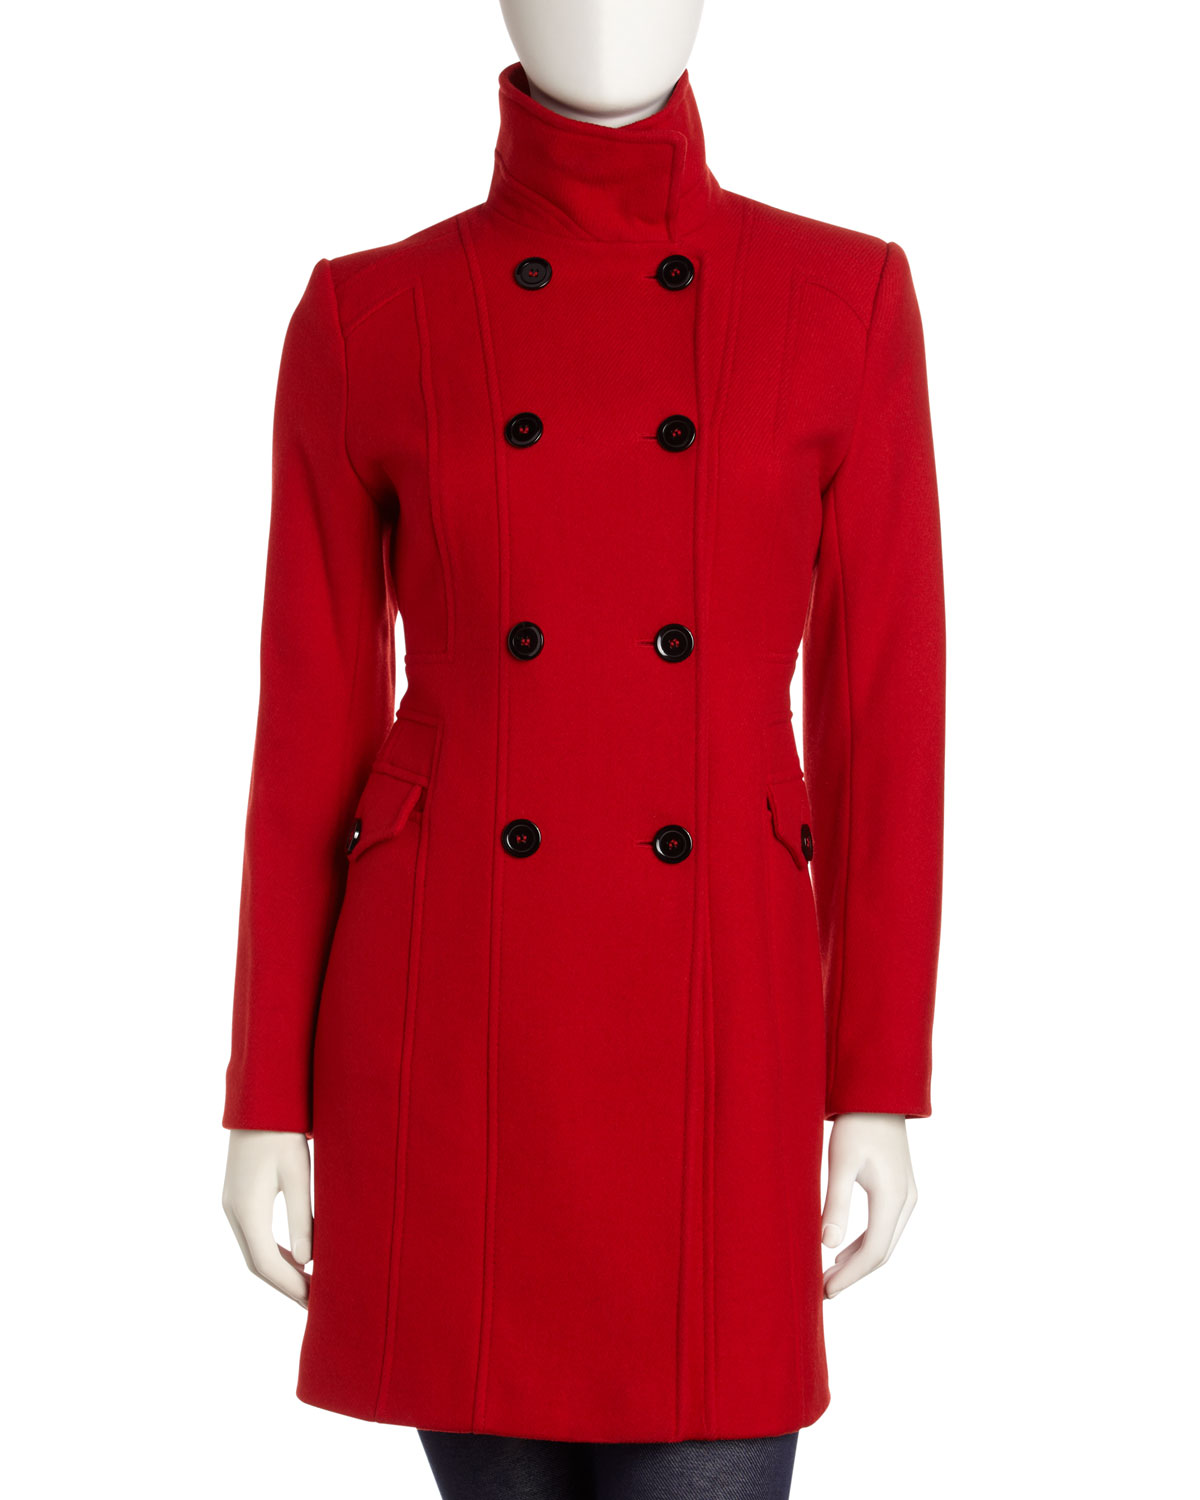 Lyst - Nicole miller Architectural Coat in Red